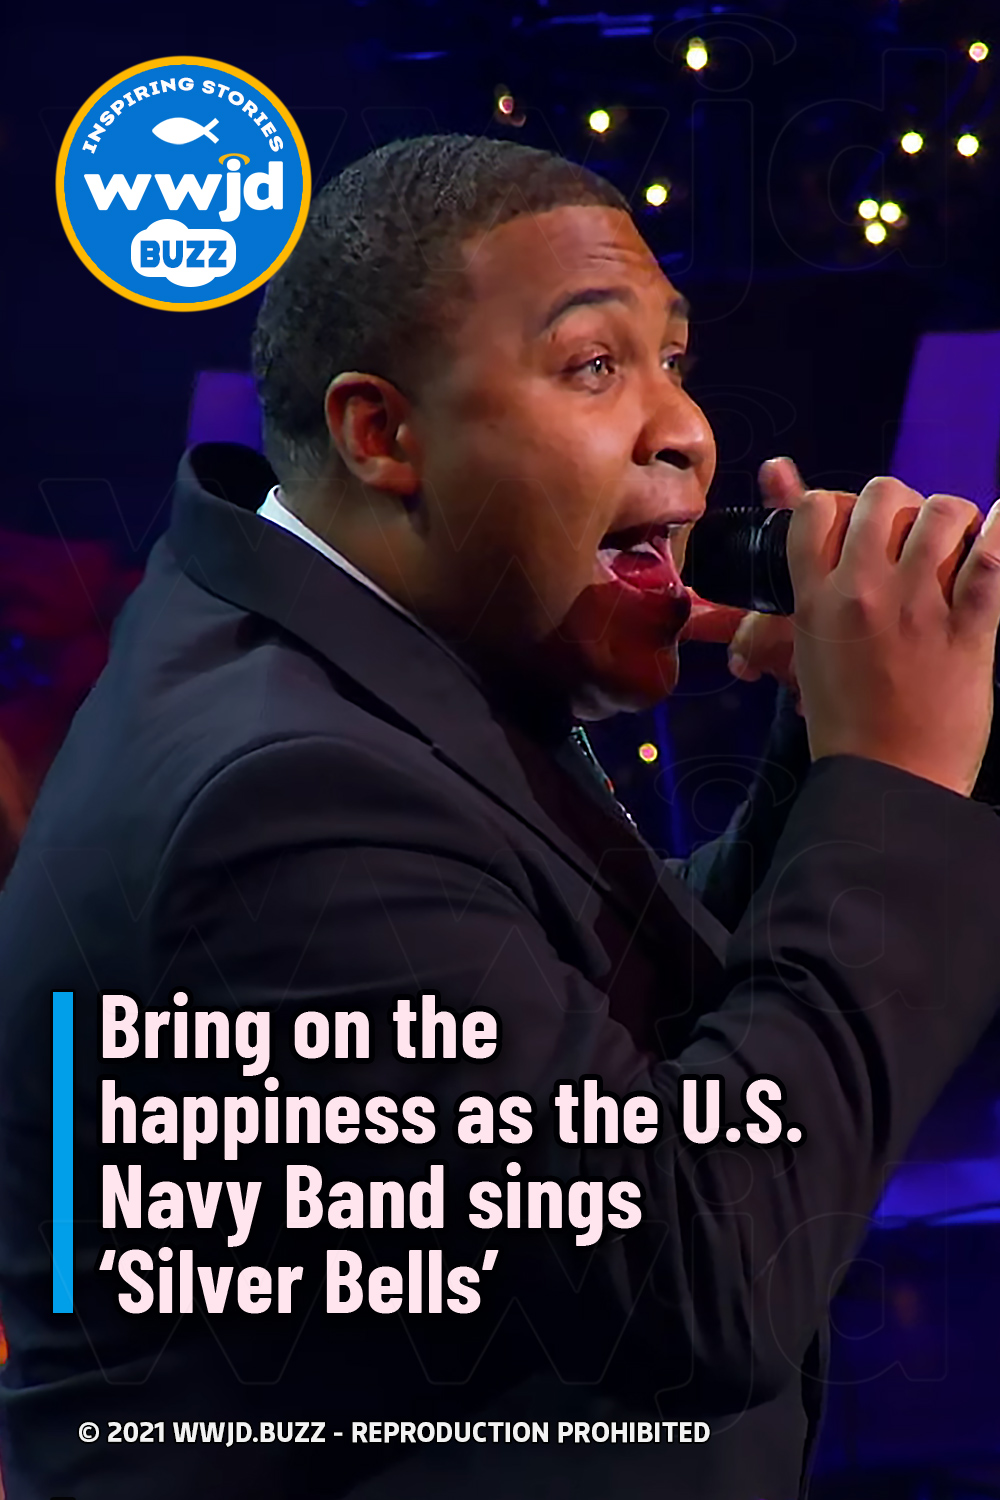 Bring on the happiness as the U.S. Navy Band sings ‘Silver Bells’